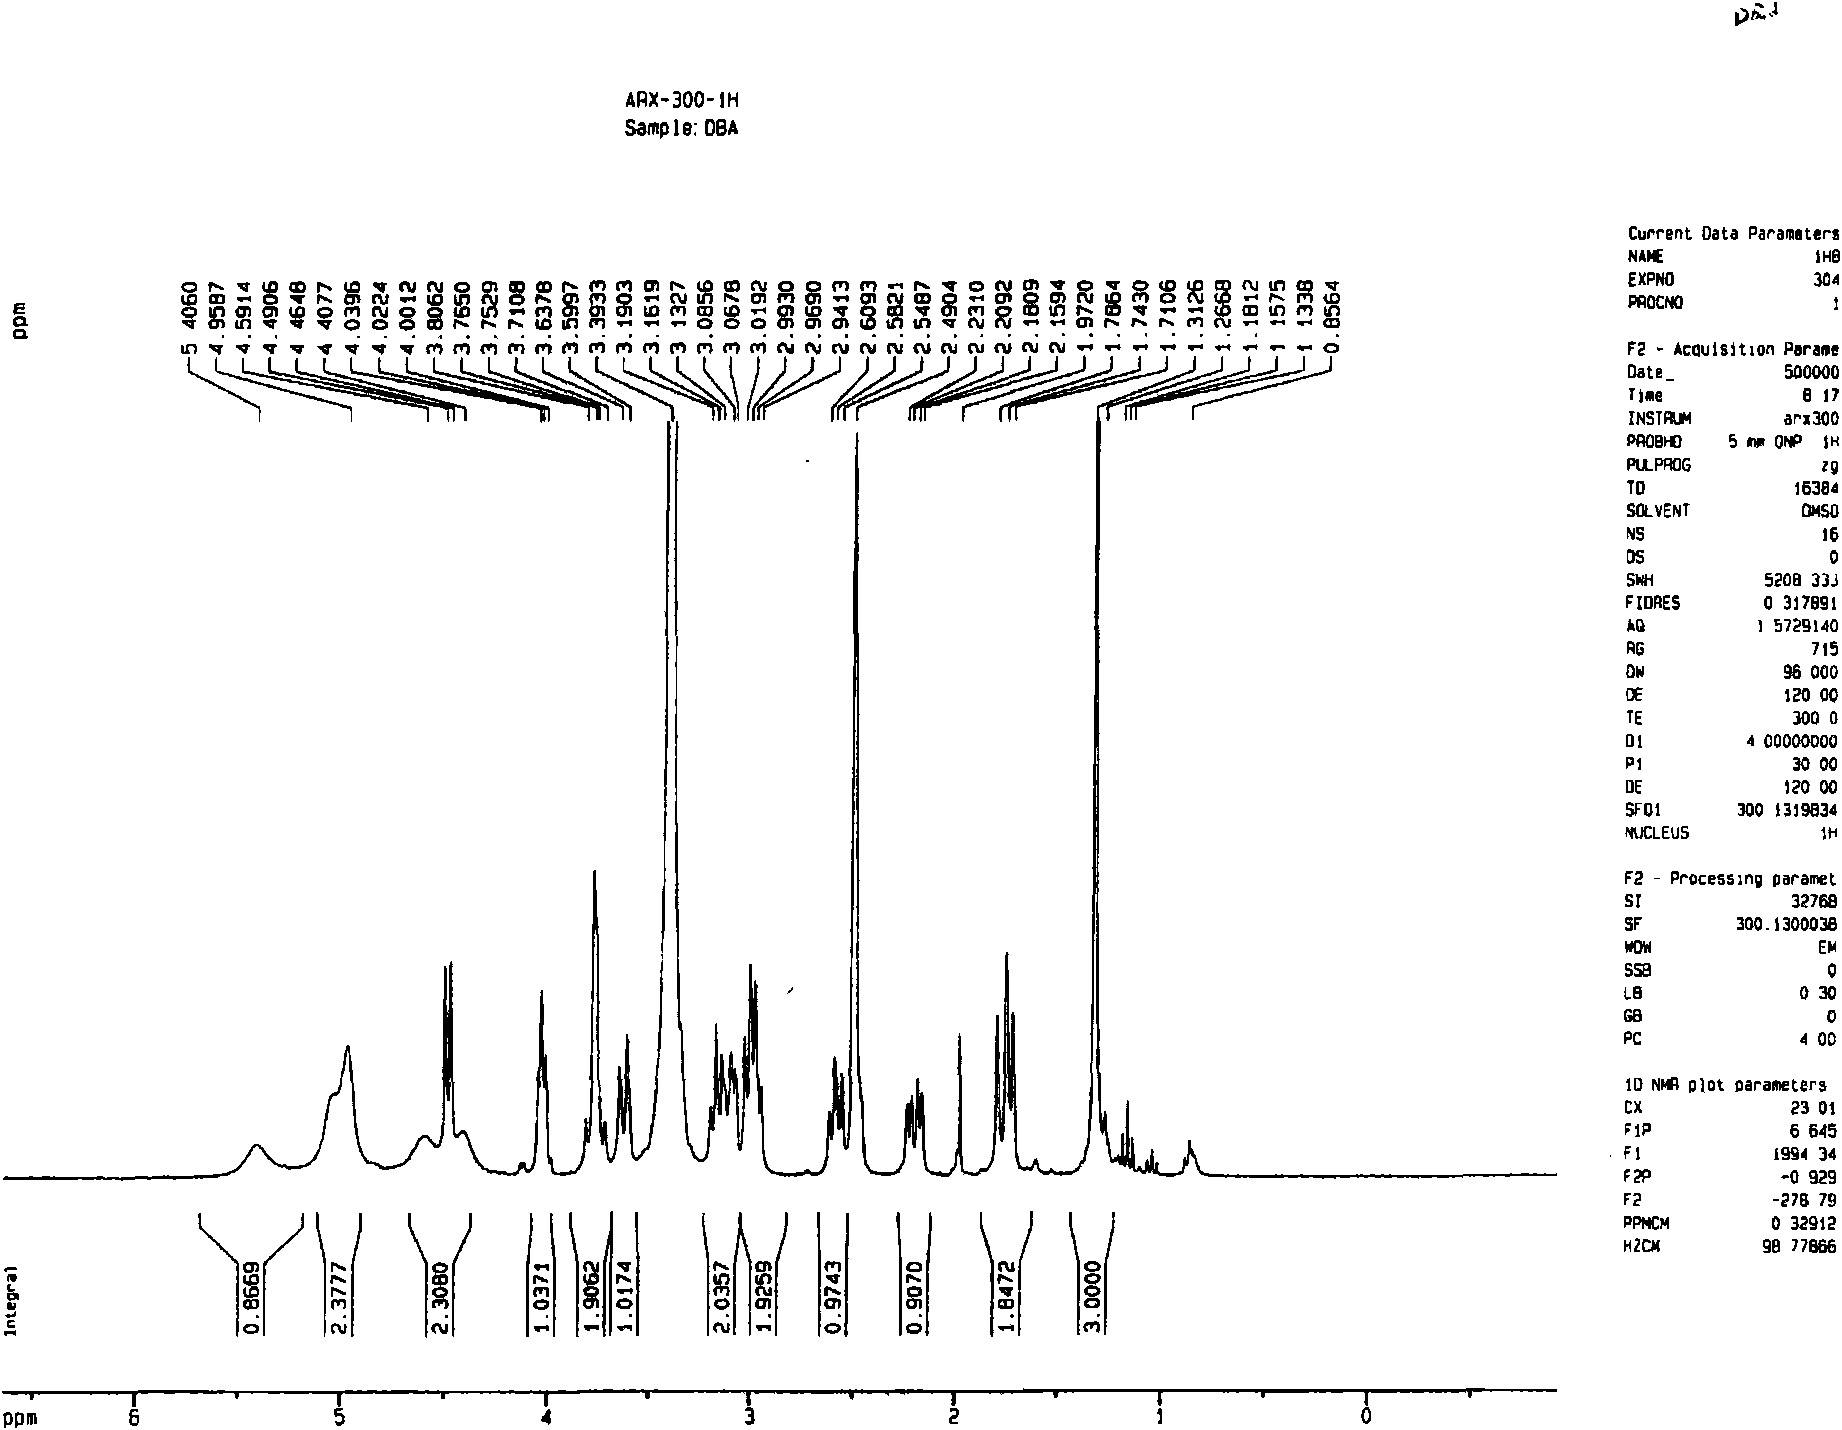 New monoterpene compounds and preparation method thereof